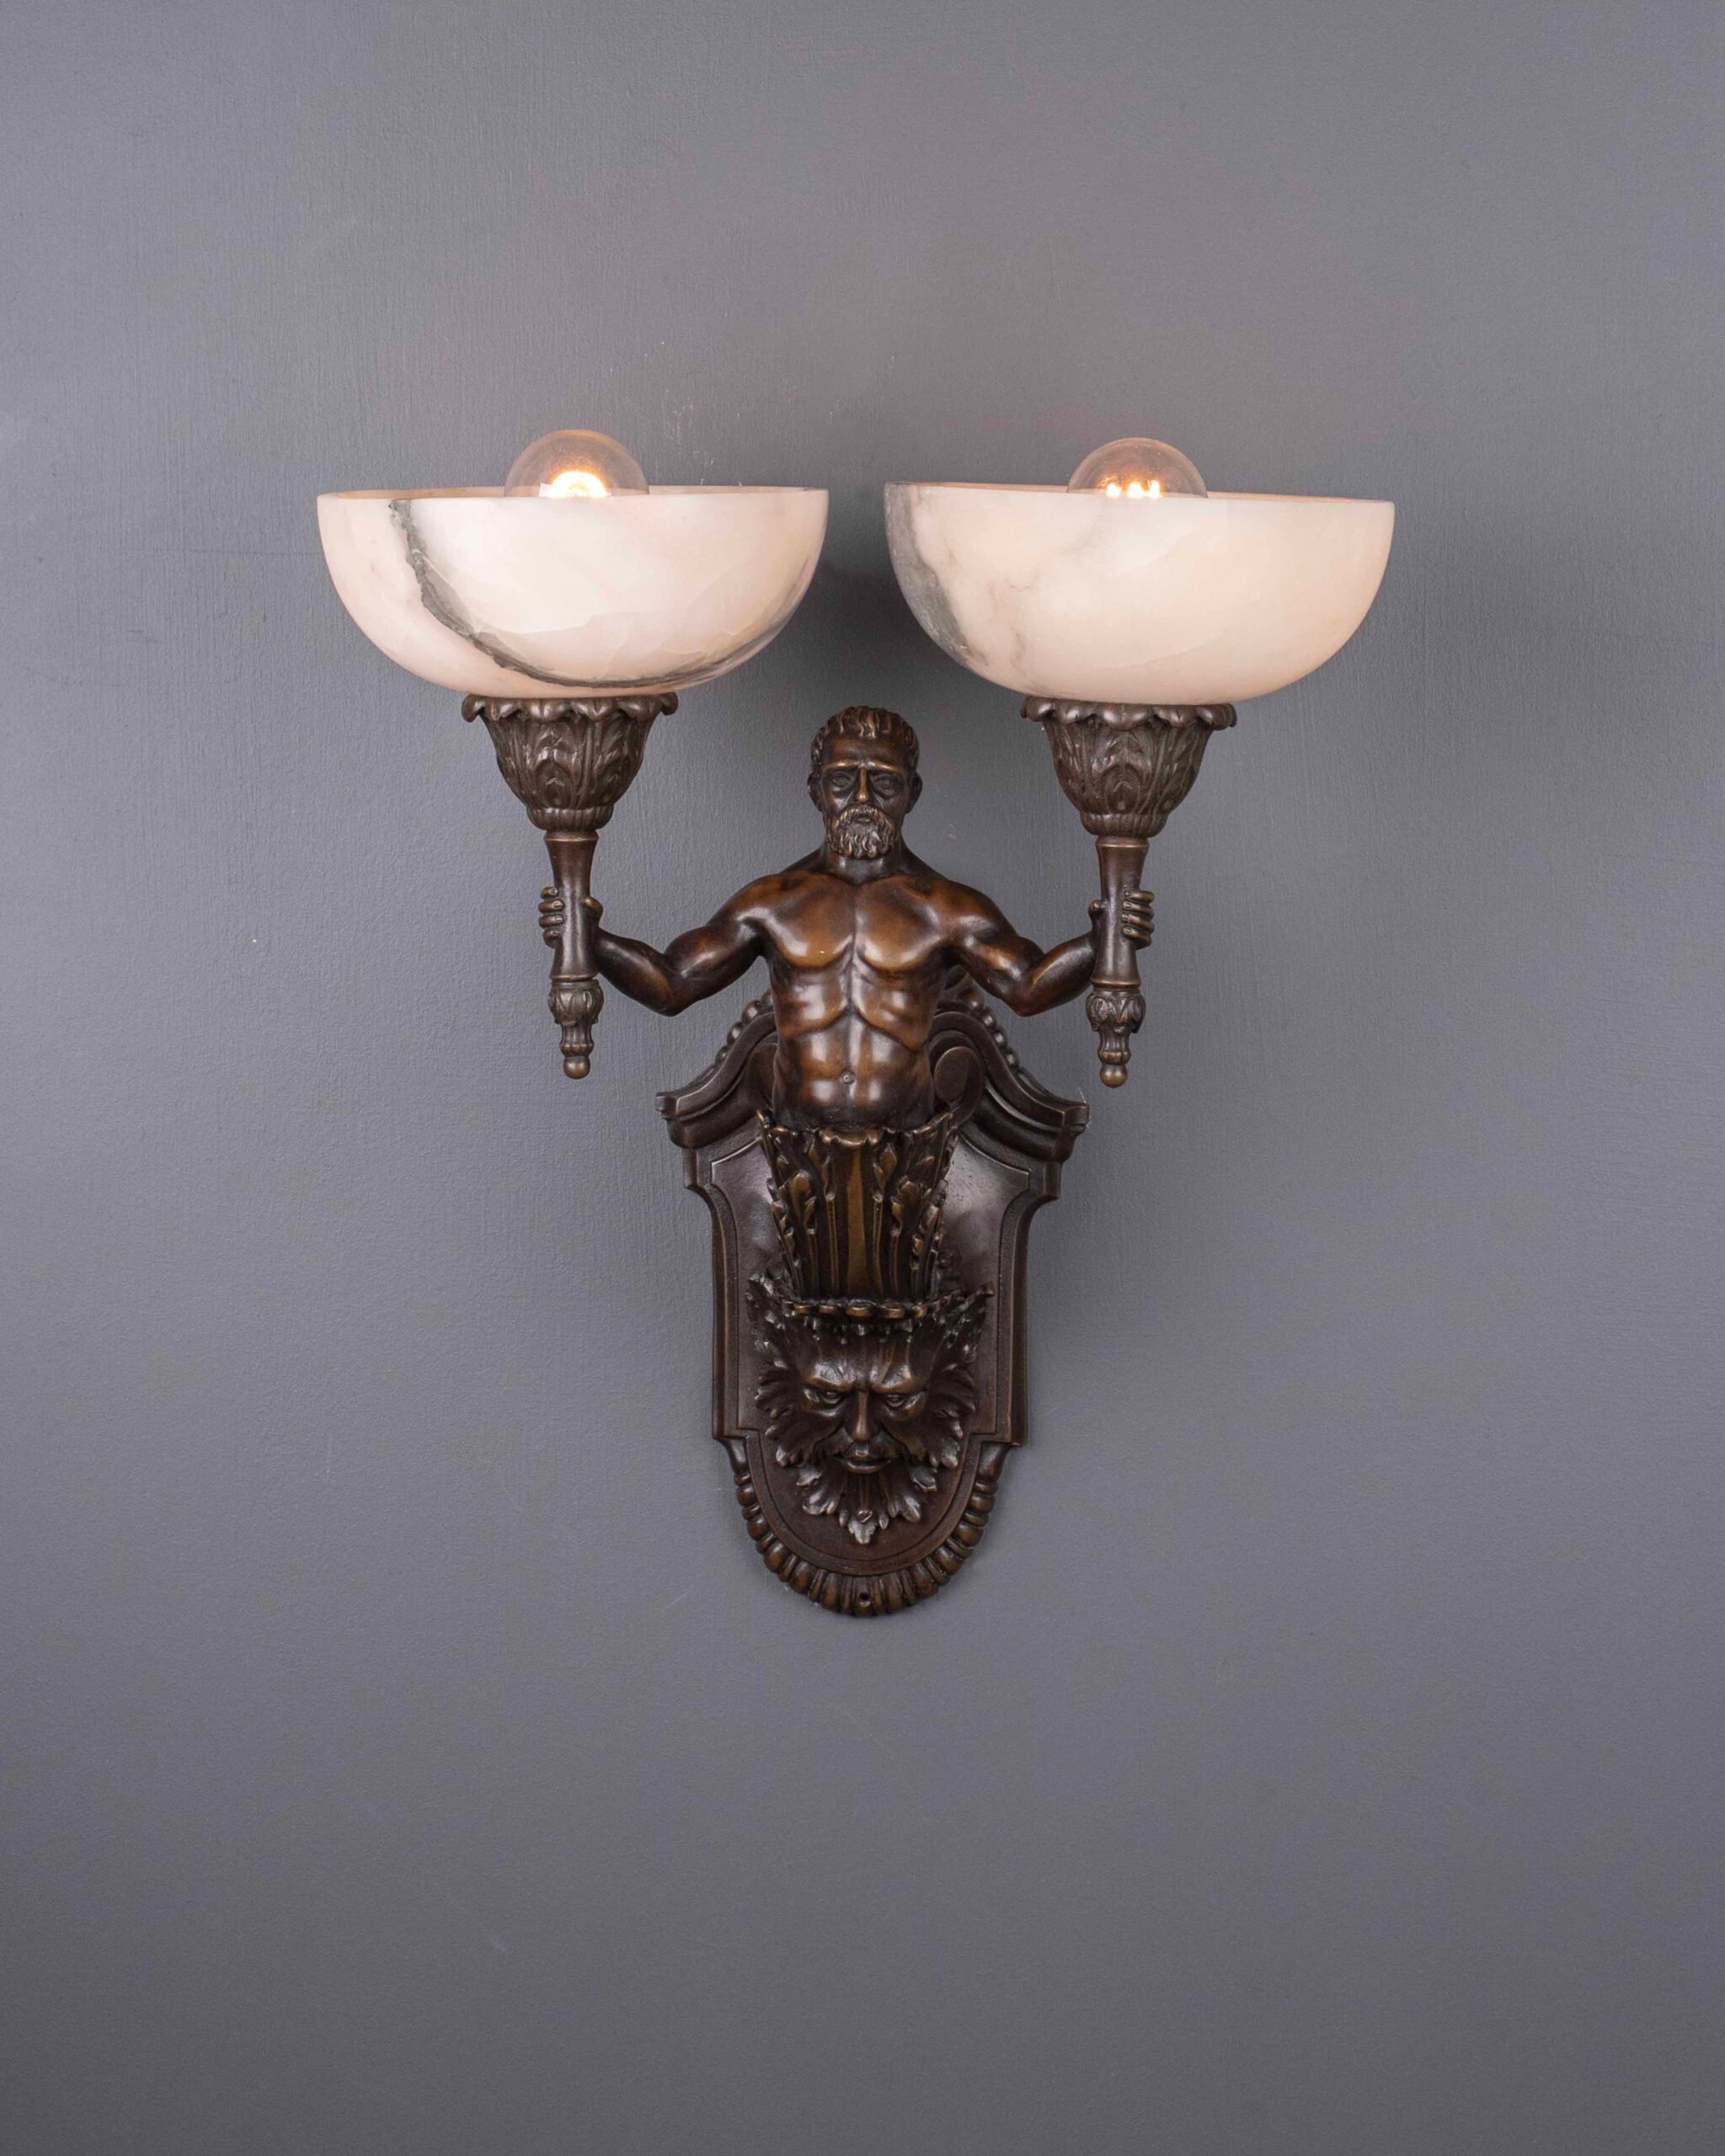 A fine pair of bronze antique wall sconces with alabaster bowls